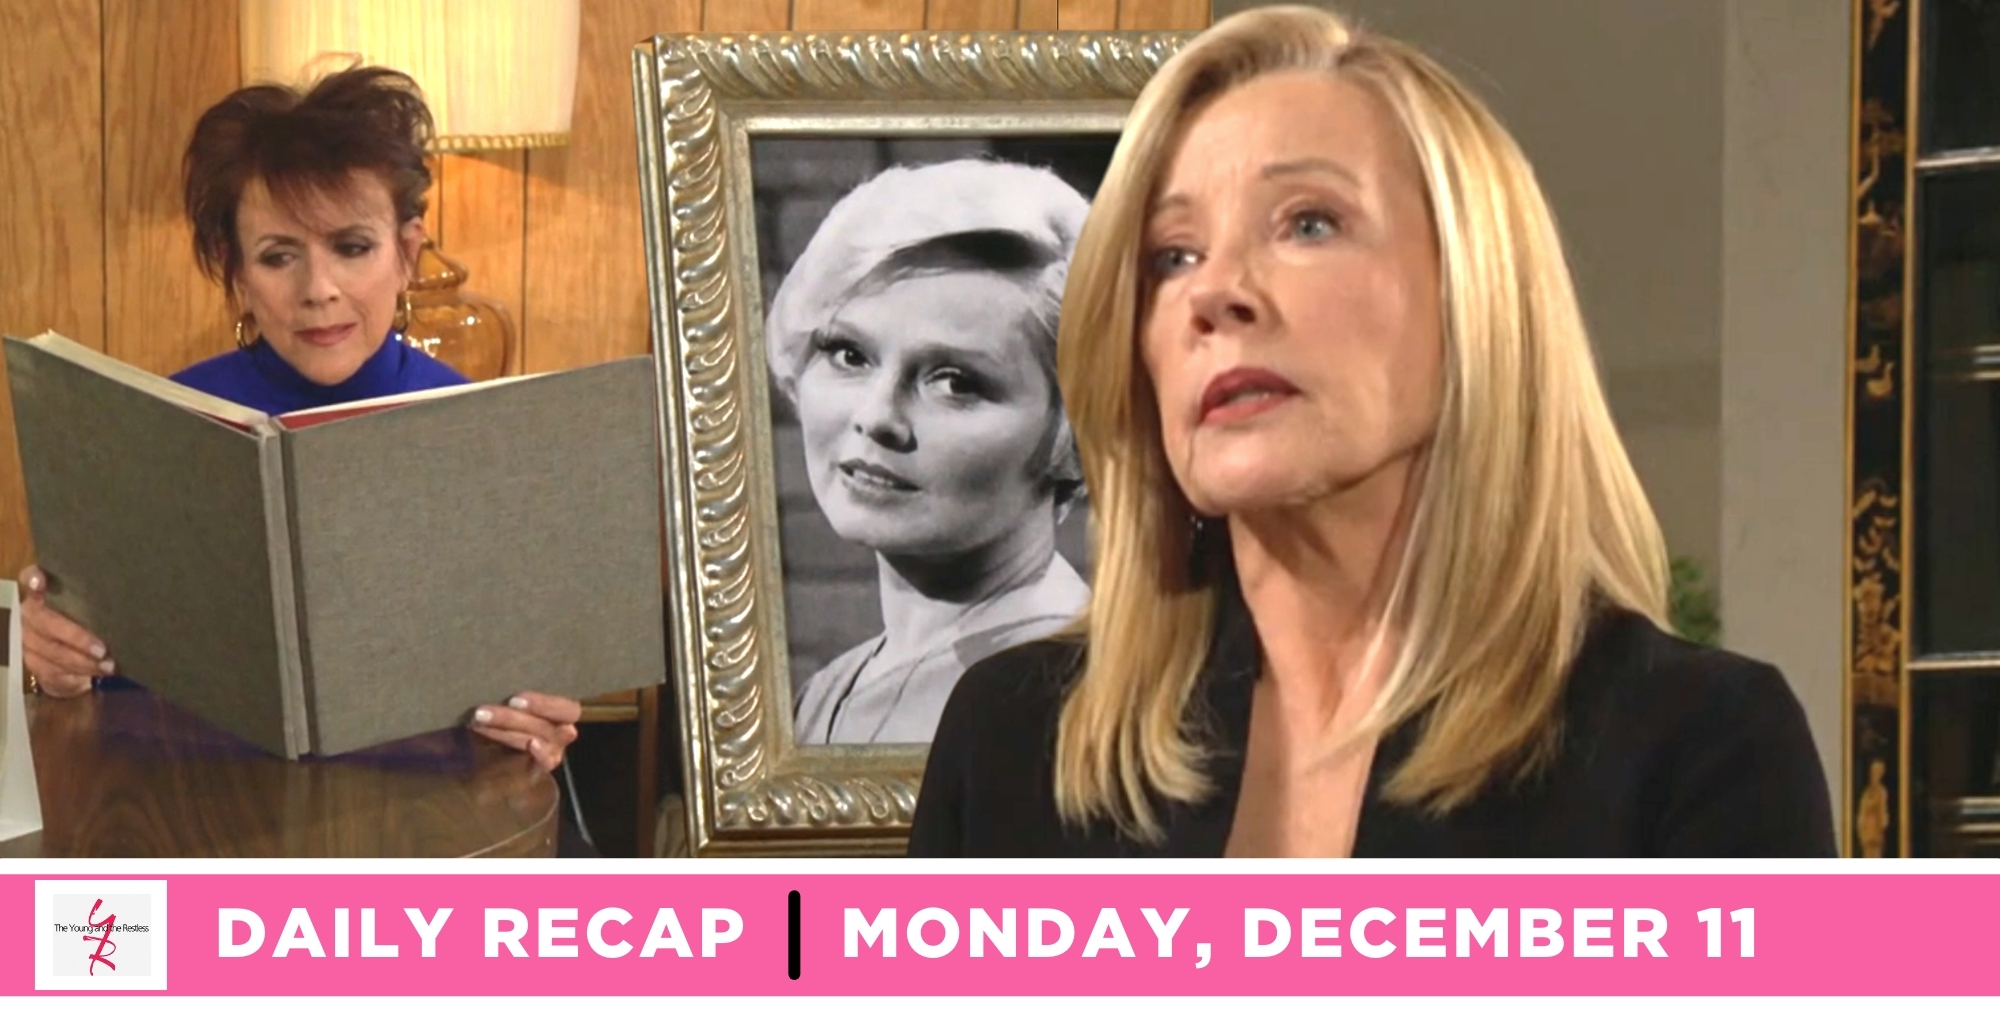 the young and the restless recap for december 11, episode 12763, has jordan looking at a photo album, frame with eve, and nikki.